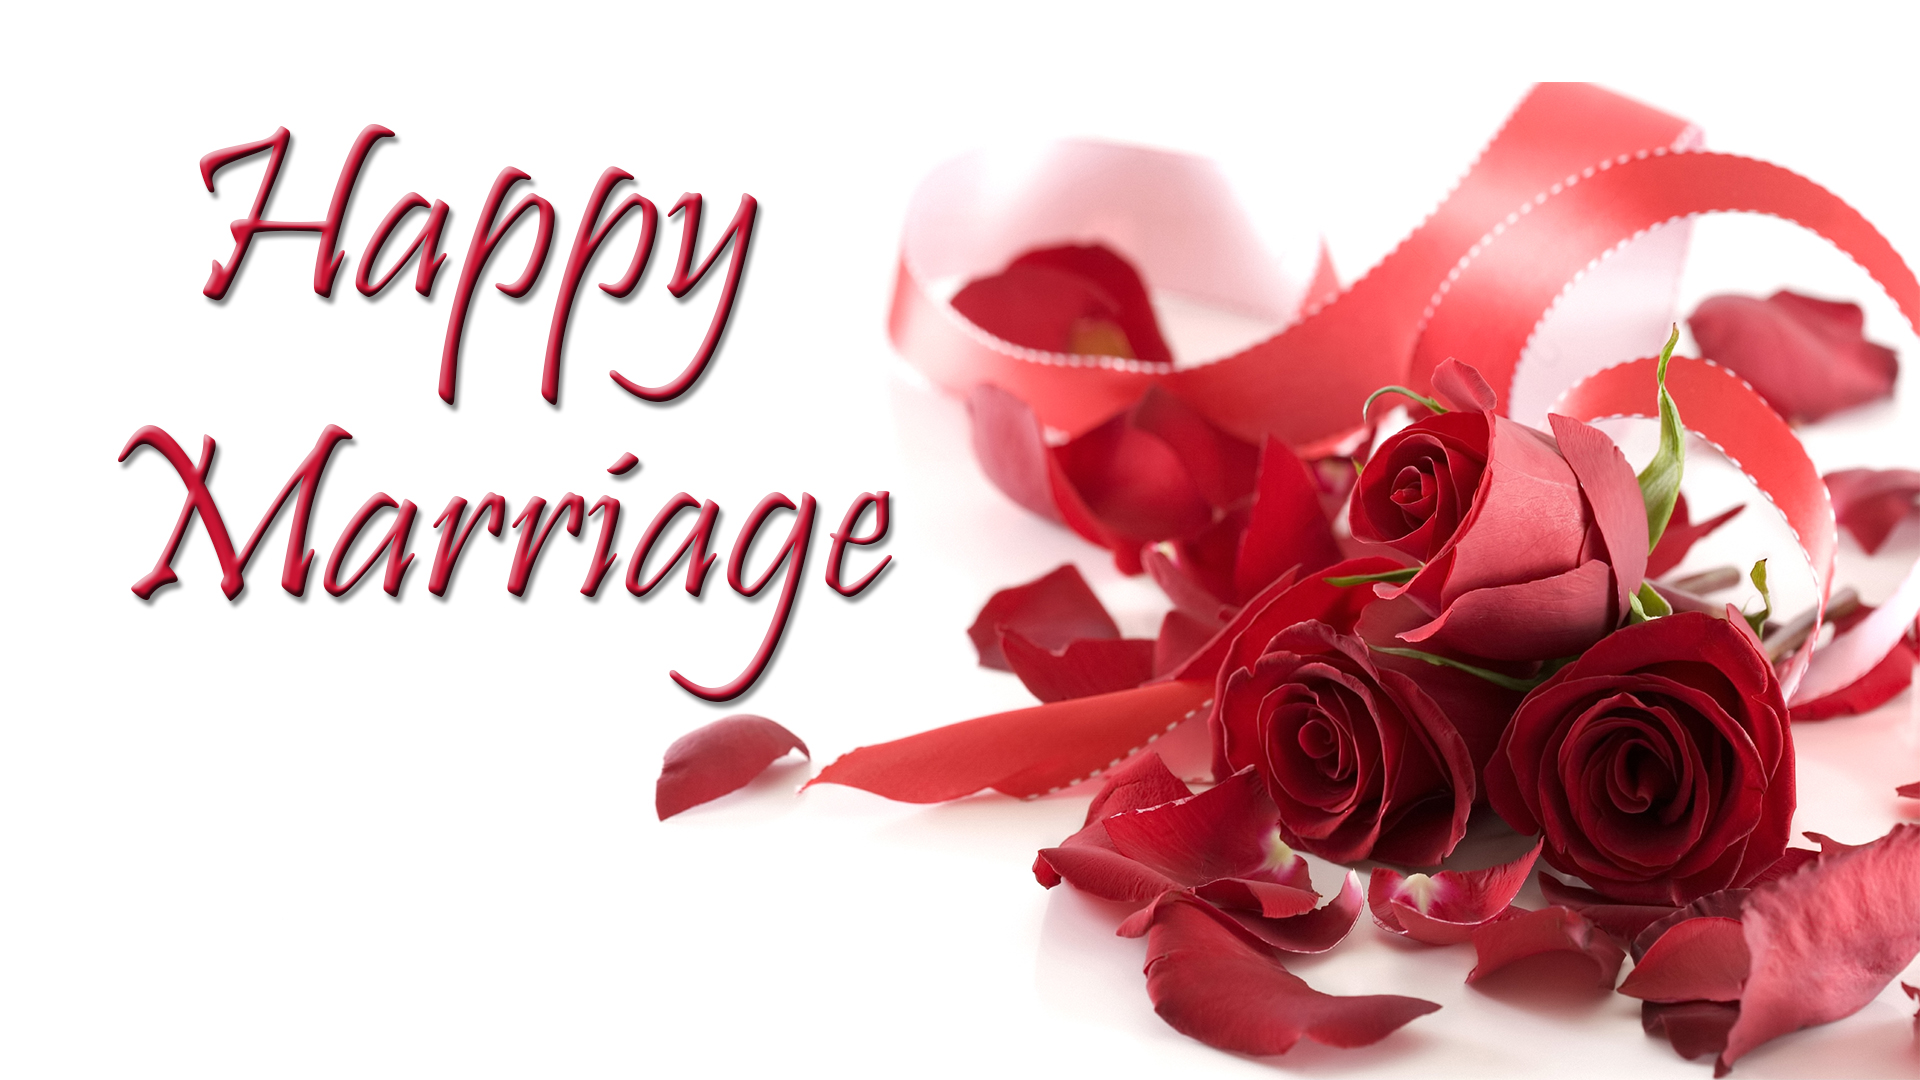 happy marriage hd image